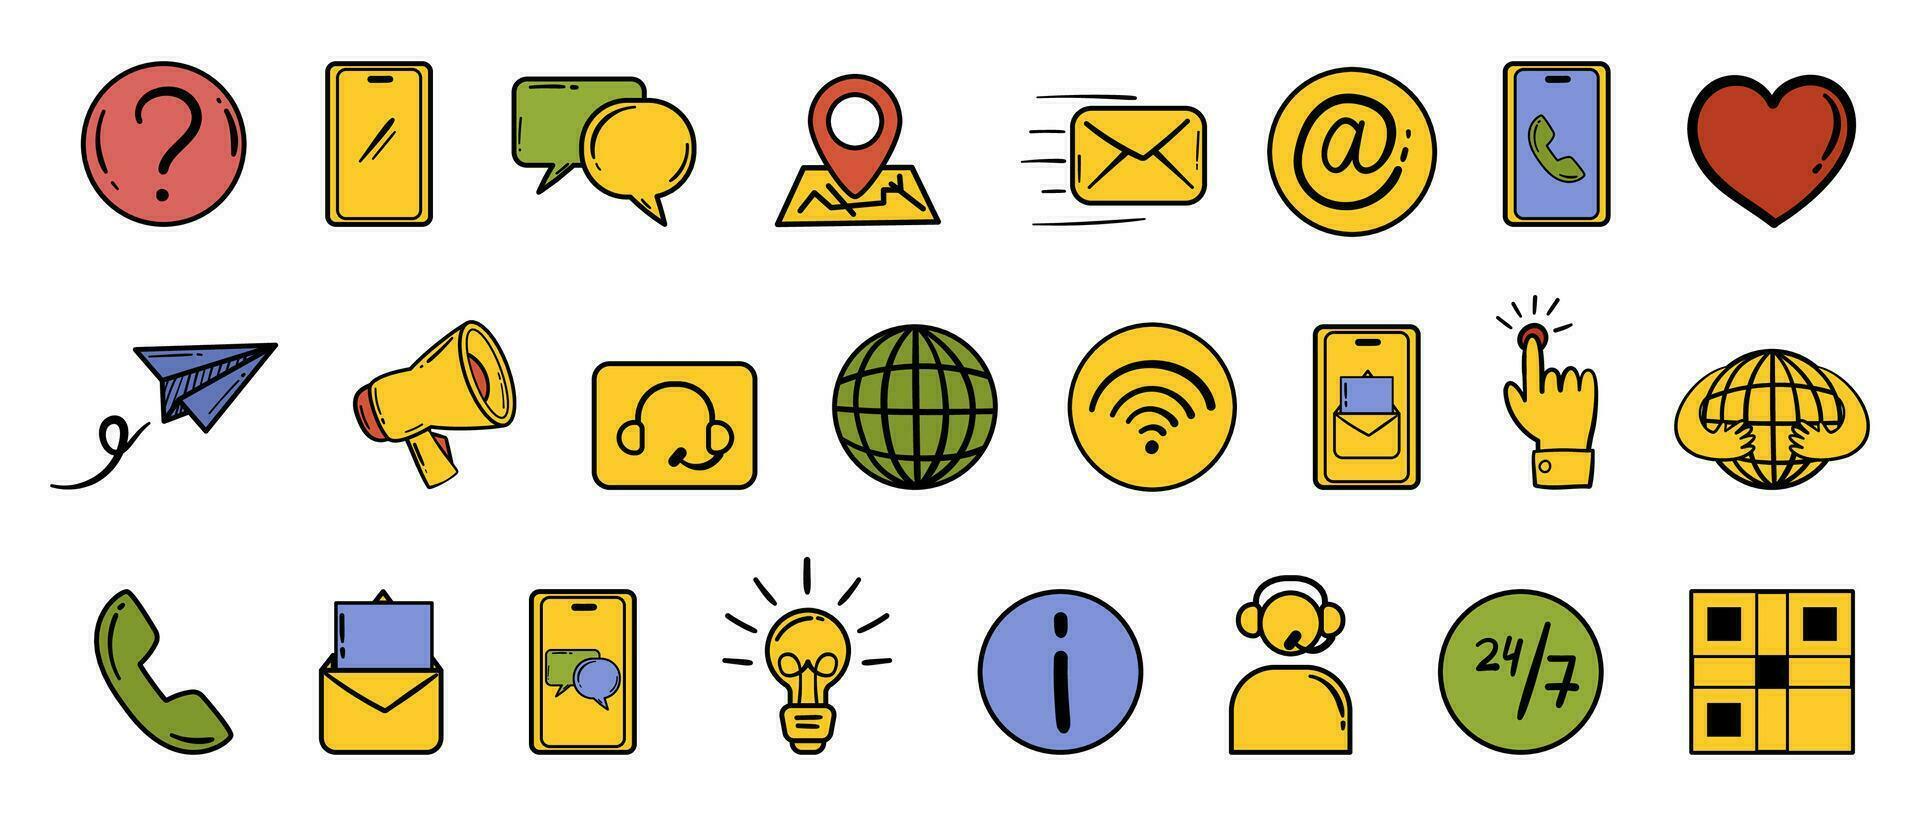 Contact us icon collection in hand drawn doodle line and color style. Vector set with customer support symbols - chat, email, phone and others.